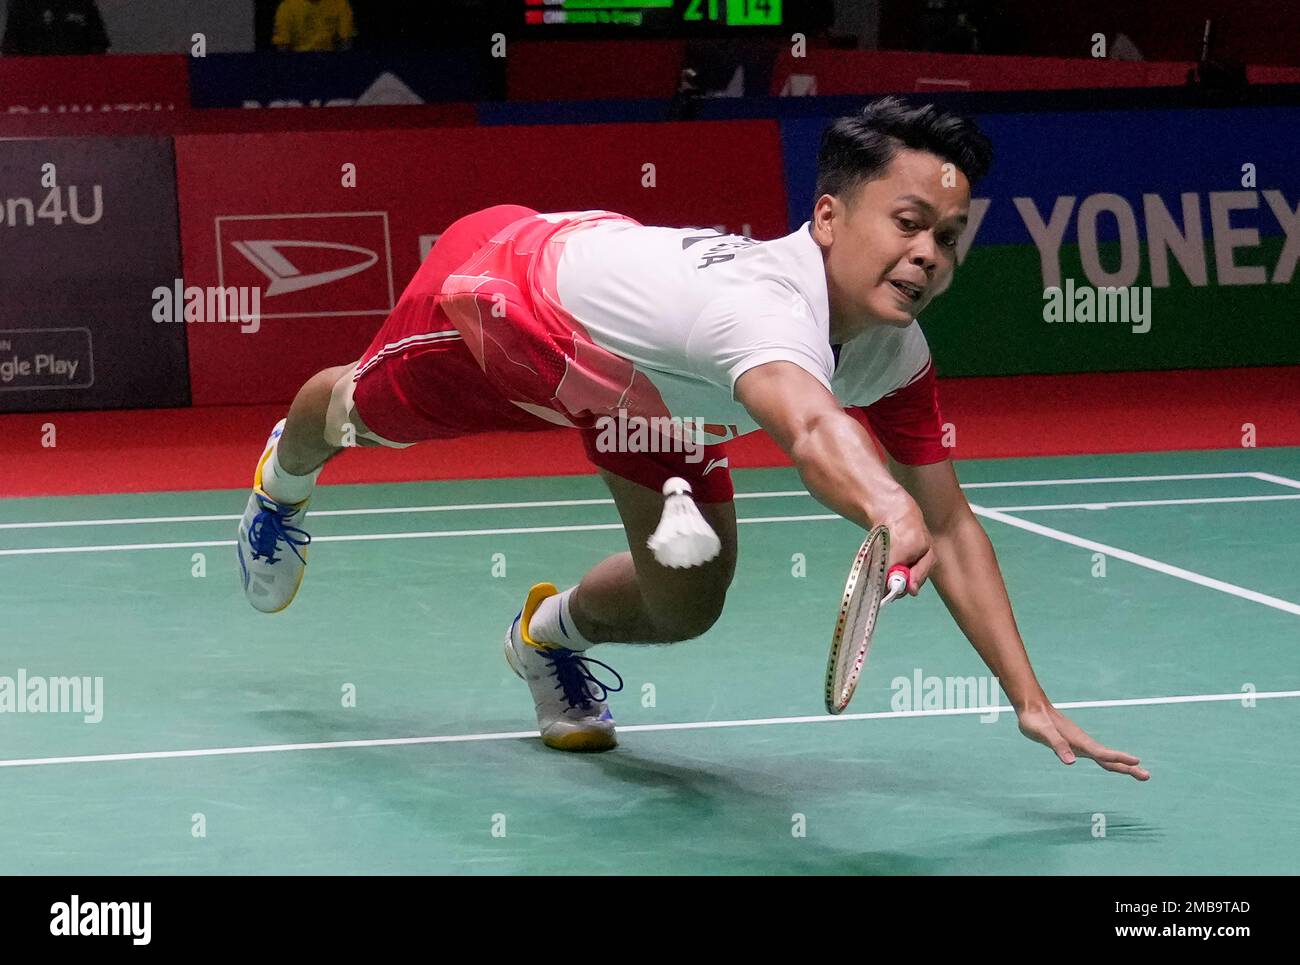 Anthony Sinisuka Ginting of Indonesia returns a shot to Lee Zii Jia of Malaysia during the quarterfinal round of the mens single match in the Indonesia Masters badminton tournament in Jakarta, Indonesia,